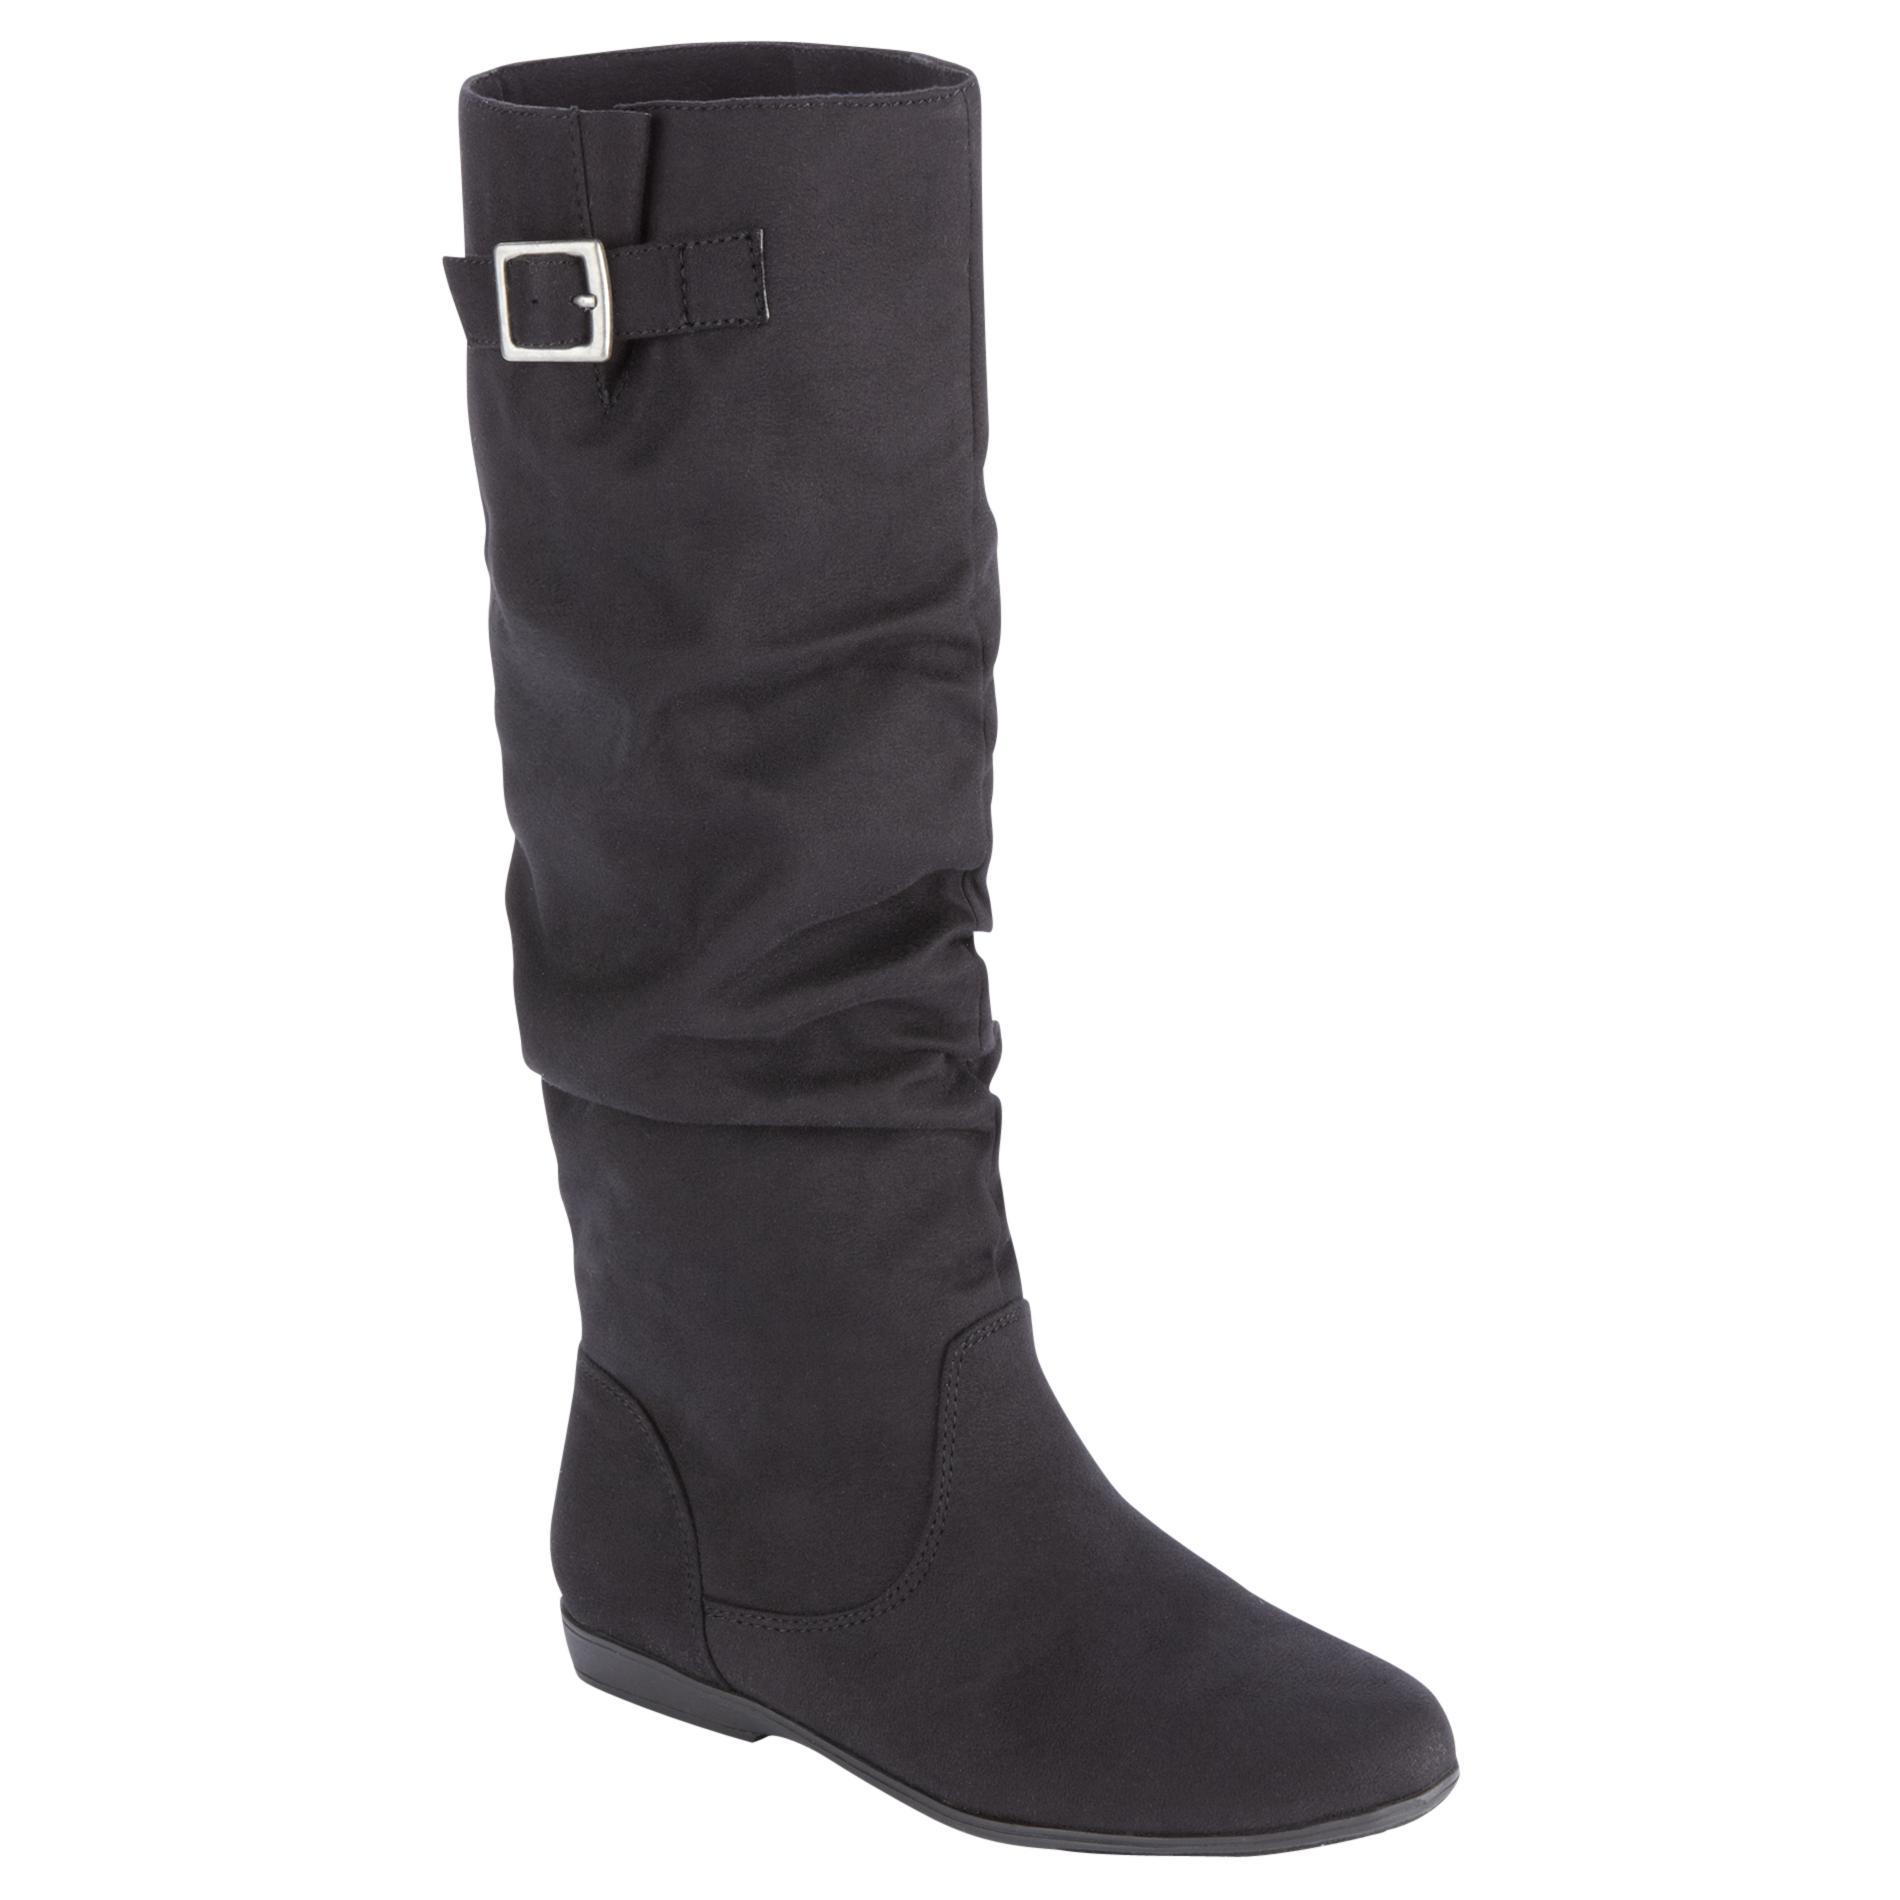 Trend Report Women's Marisa Black Faux Suede Knee High Slouch Boot